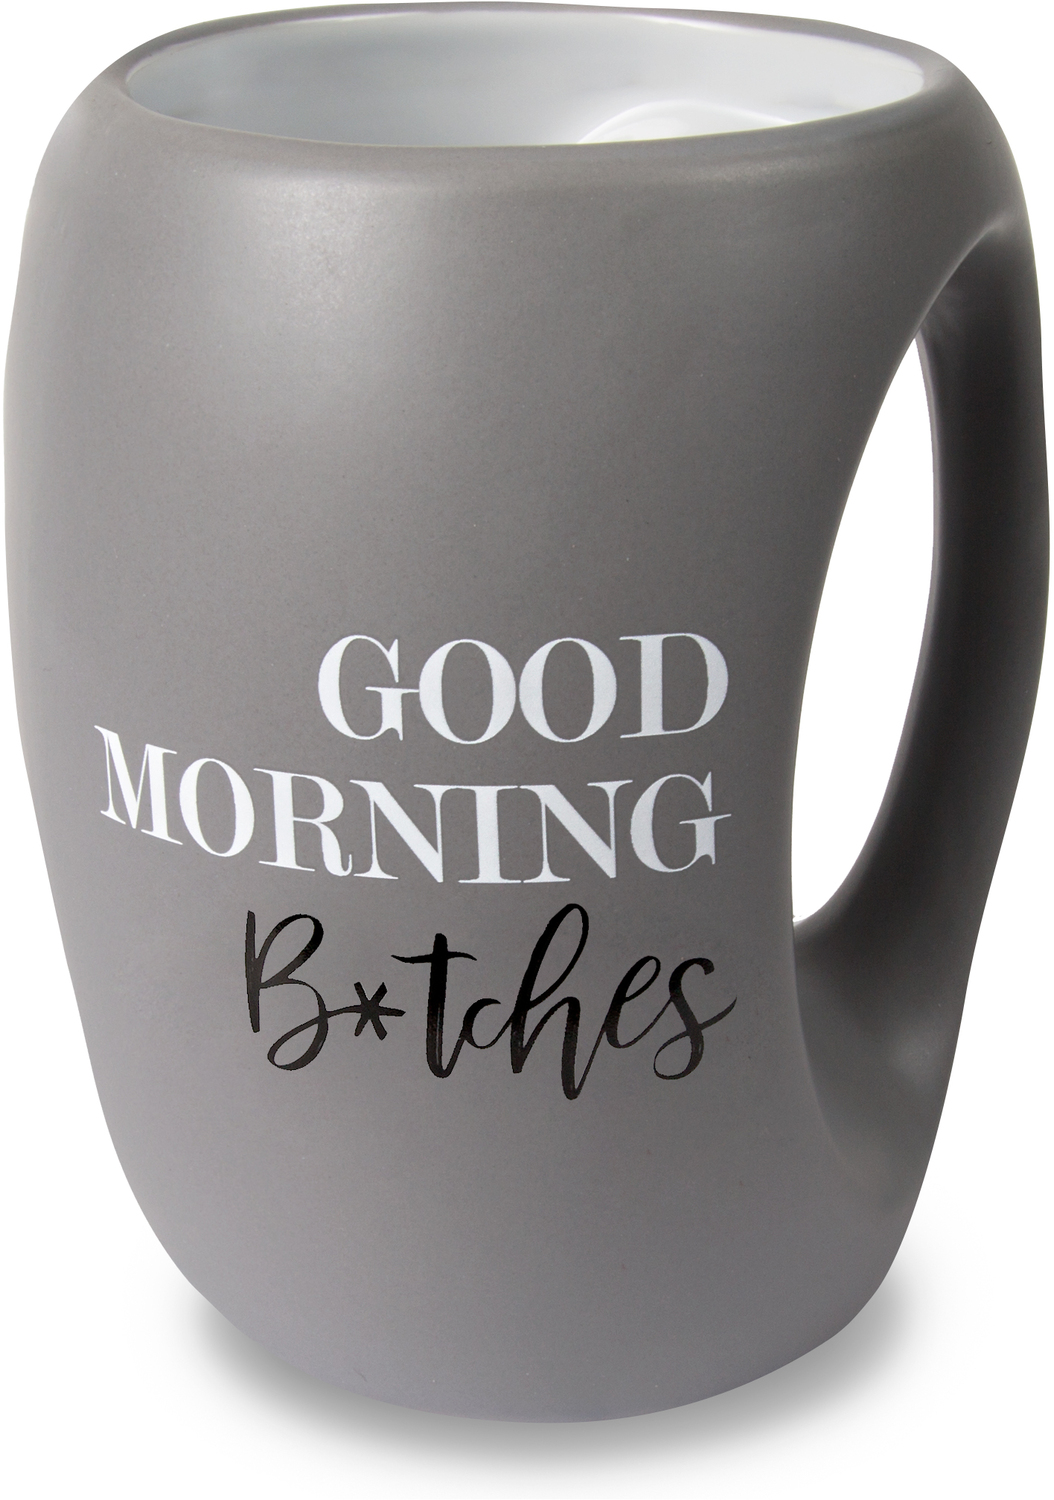 B*tches by Good Morning - B*tches - 16 oz Cup